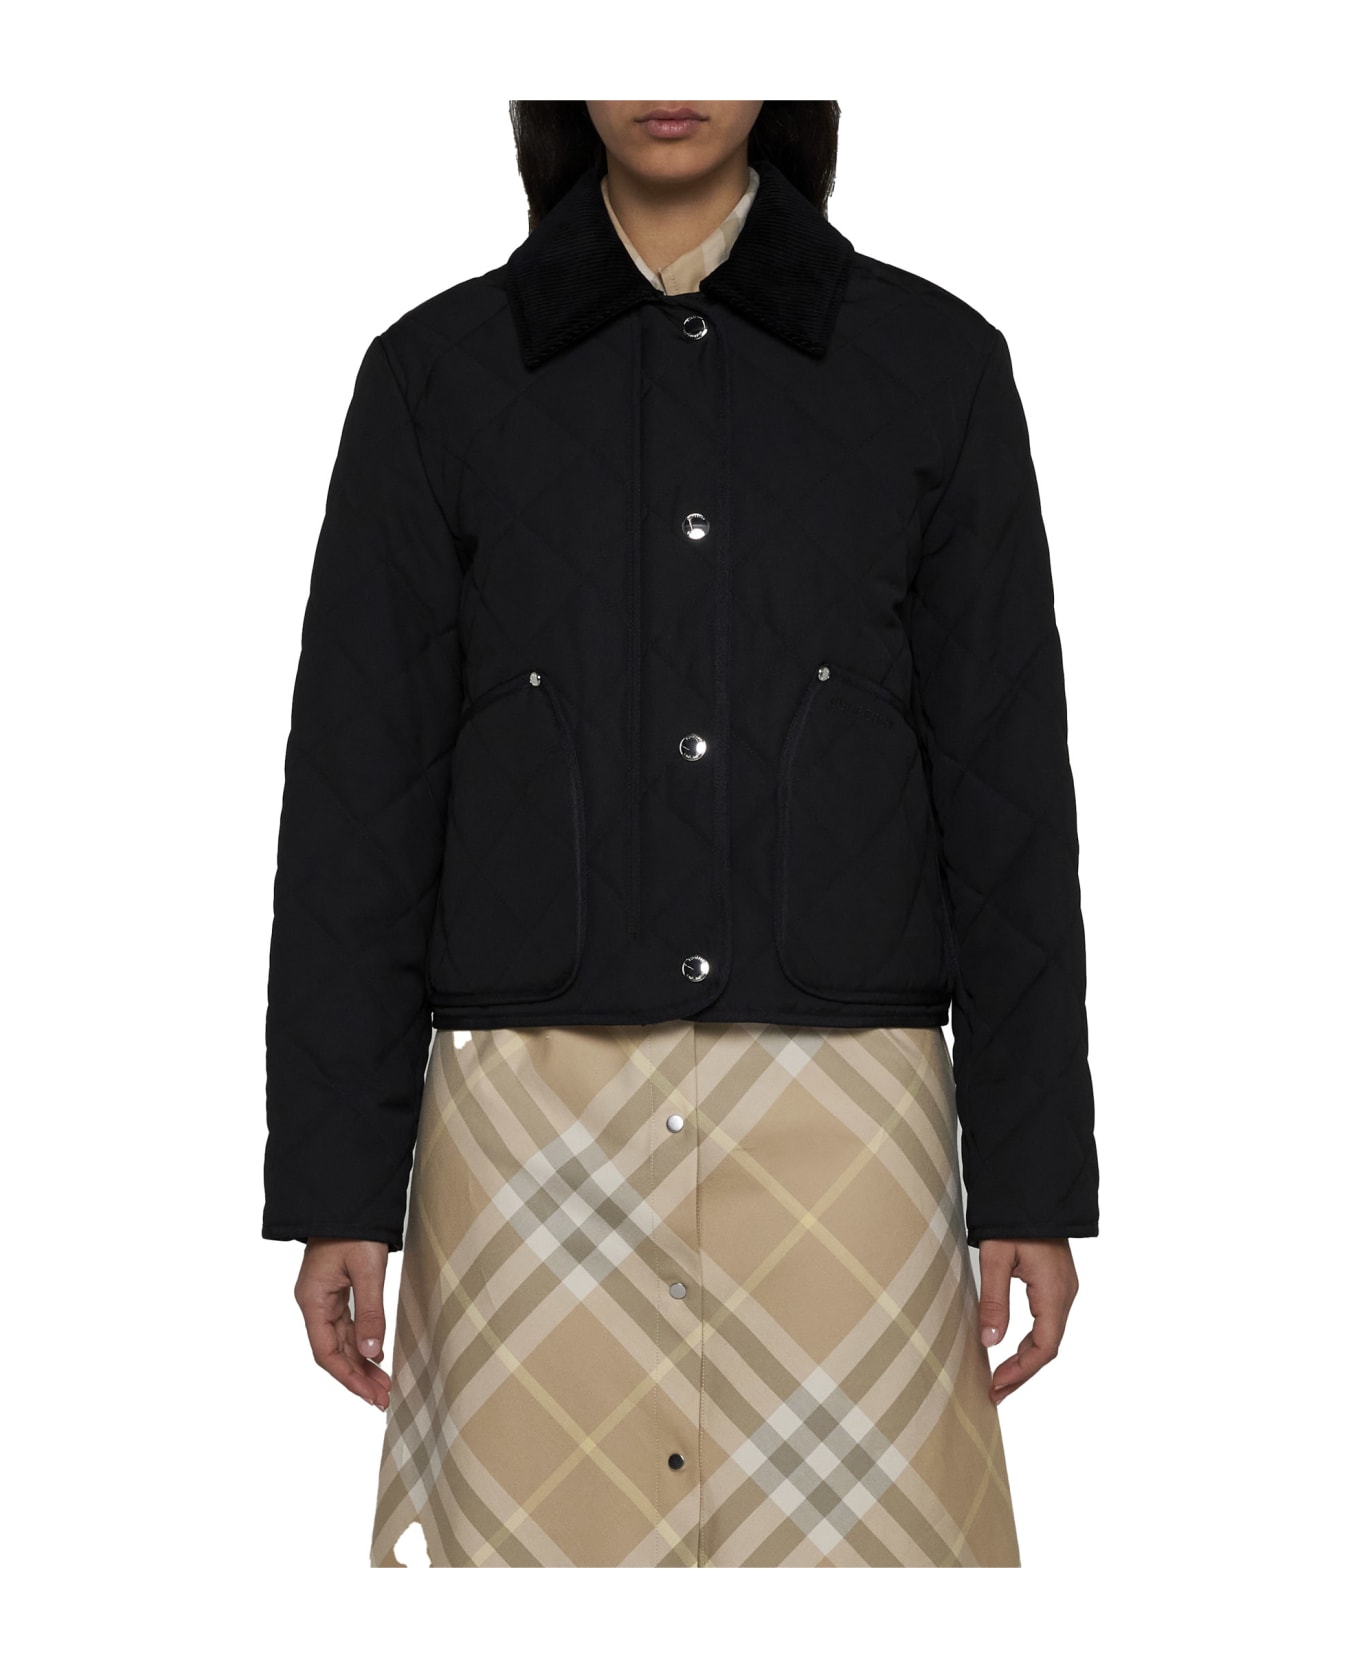 Burberry Lanford Quilted Fabric Jacket - Black ジャケット